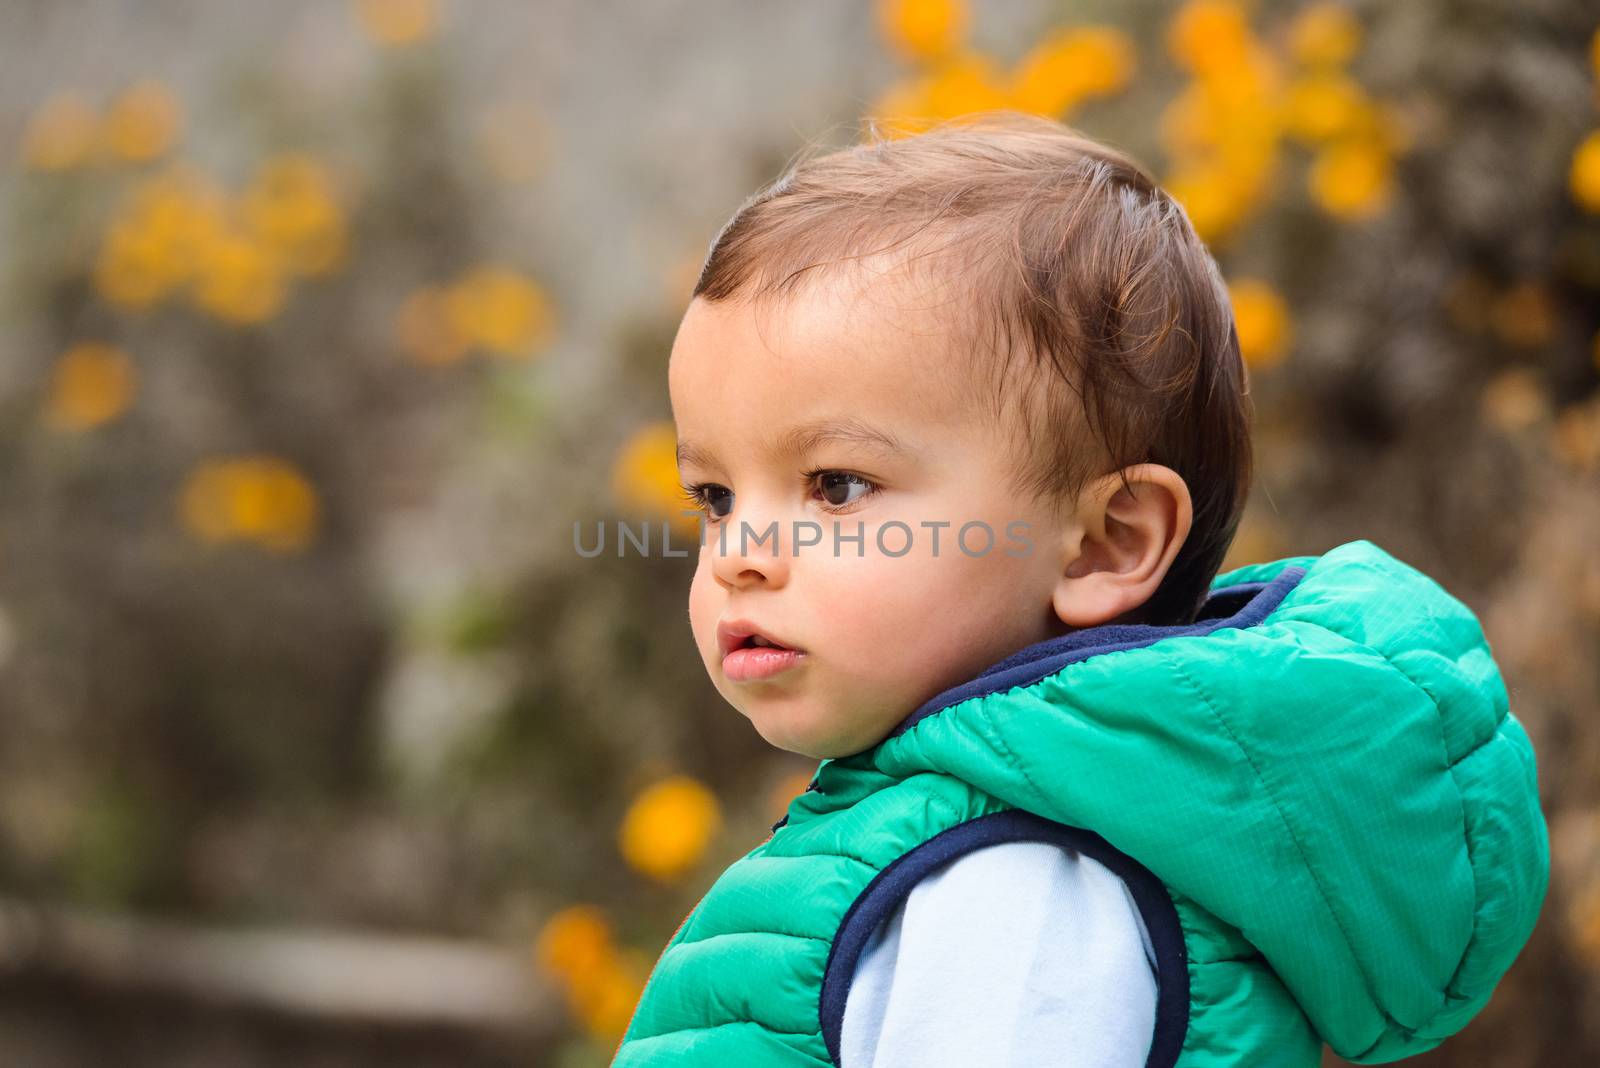 Outdoor portrait of mixed raced toddler in a garden, out of focus marigold flowers in the background.